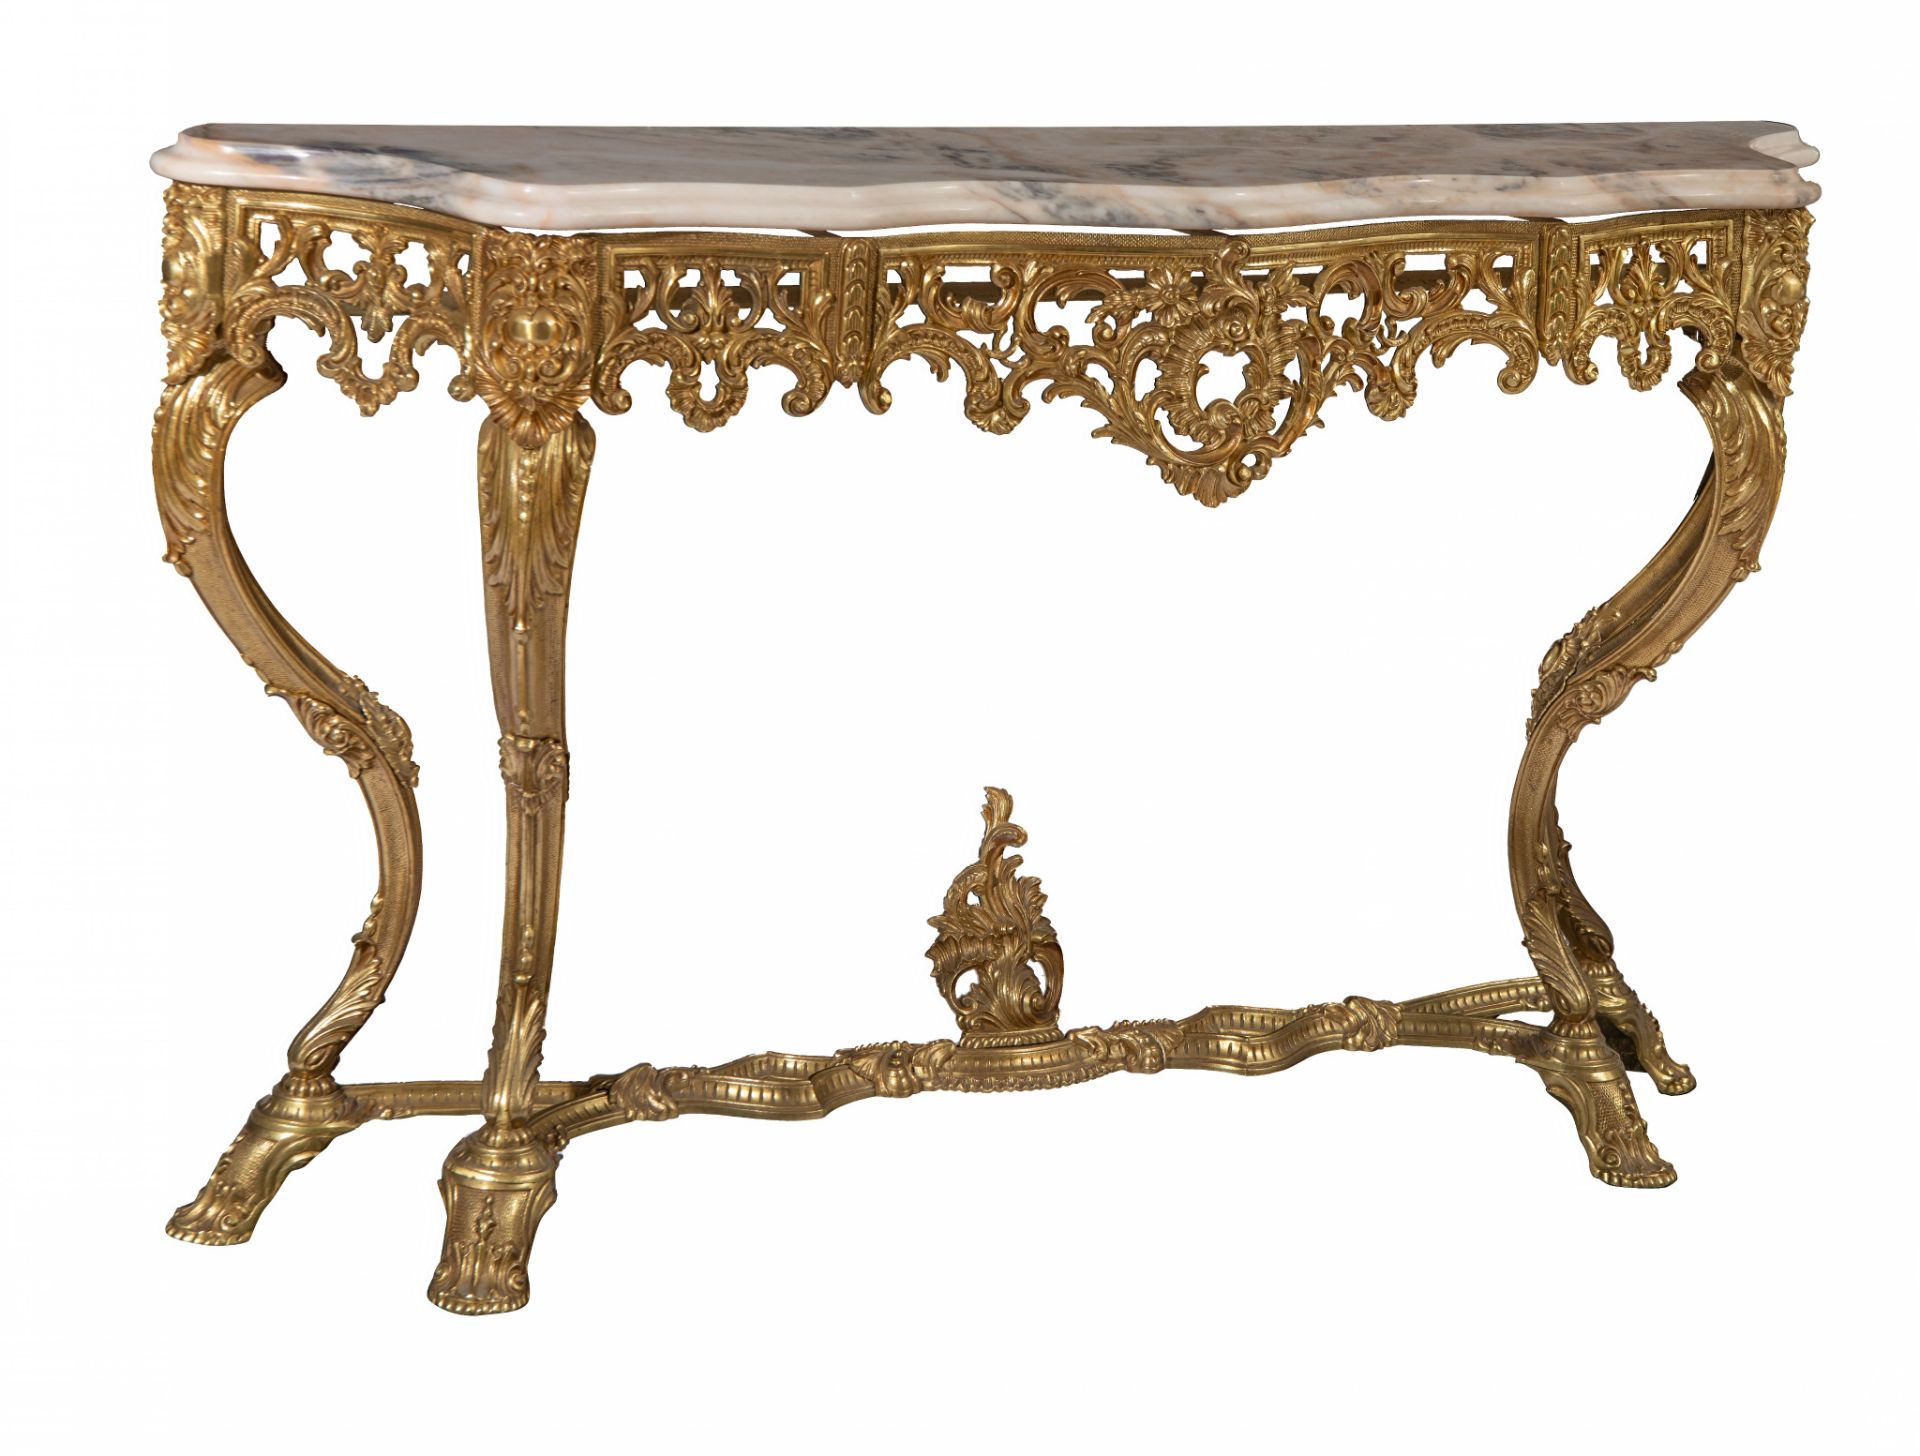 A large Rococo style gilt metal console table and mirror, H 125 - W 110 cm (the mirror) - H 85 - W 1 - Image 2 of 12